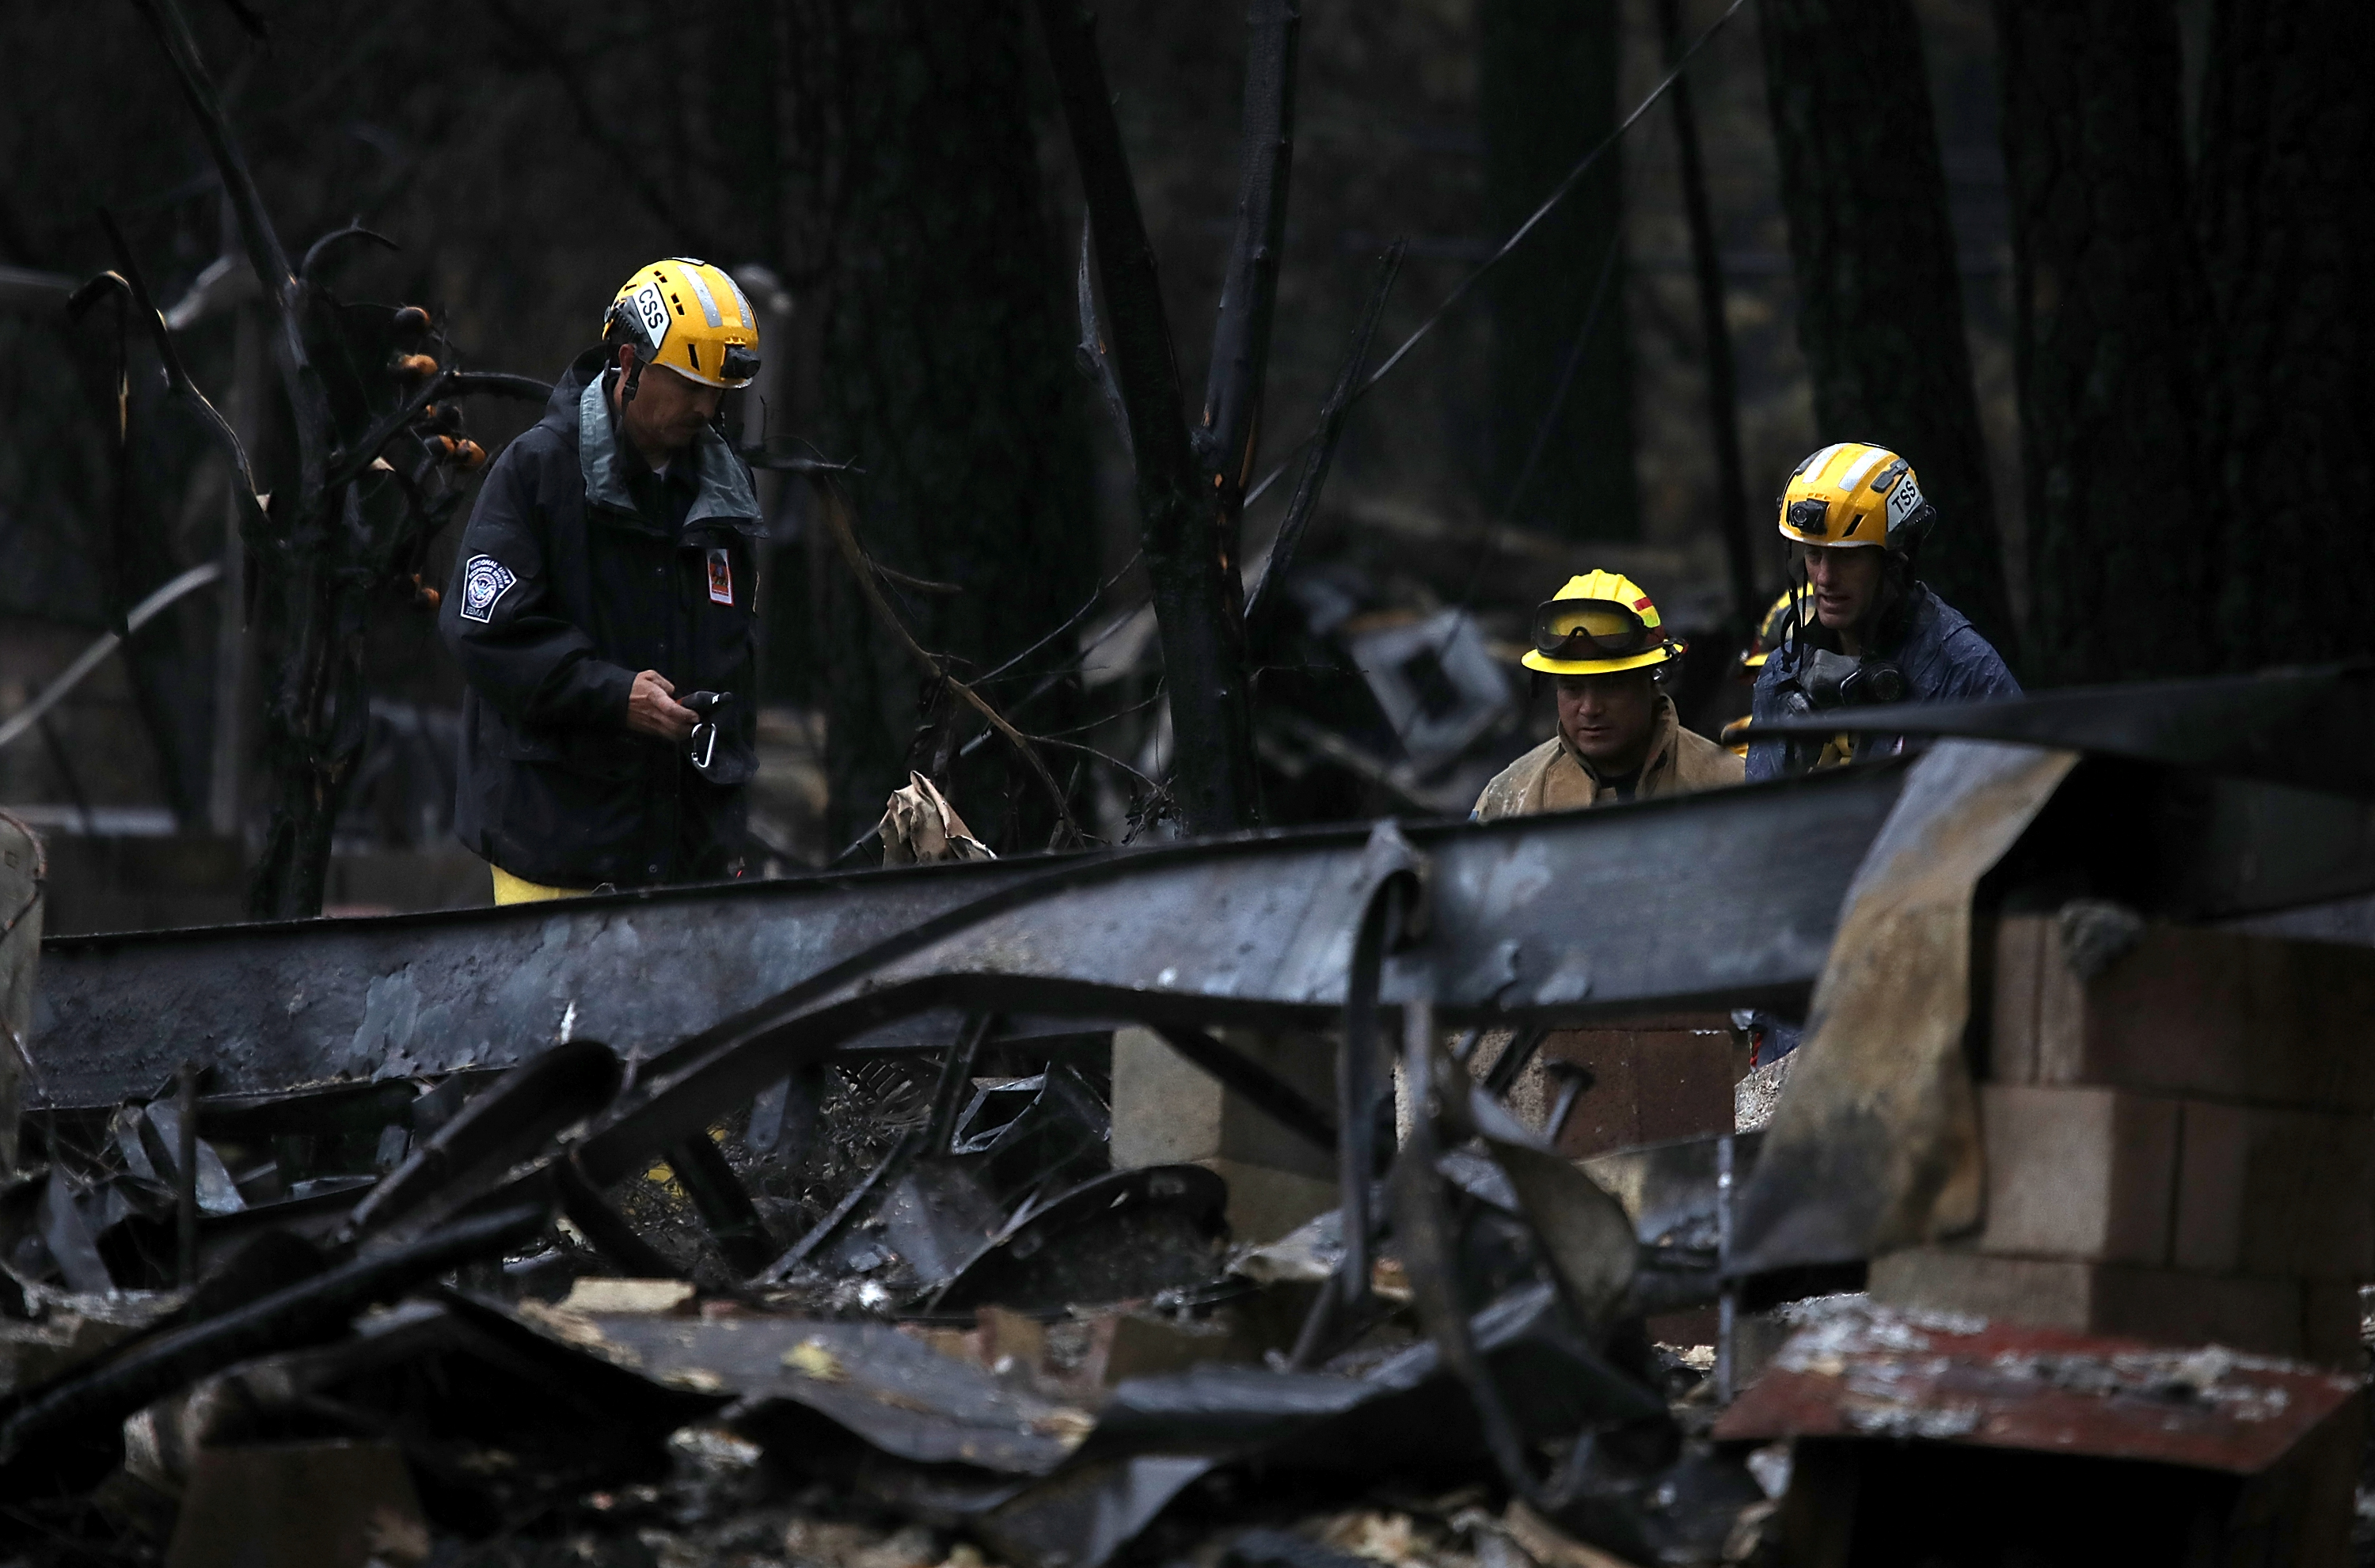  Search and rescue crews search a property that was destroyed by the Camp Fire for human remains on November 22, 2018 in Paradise, California.